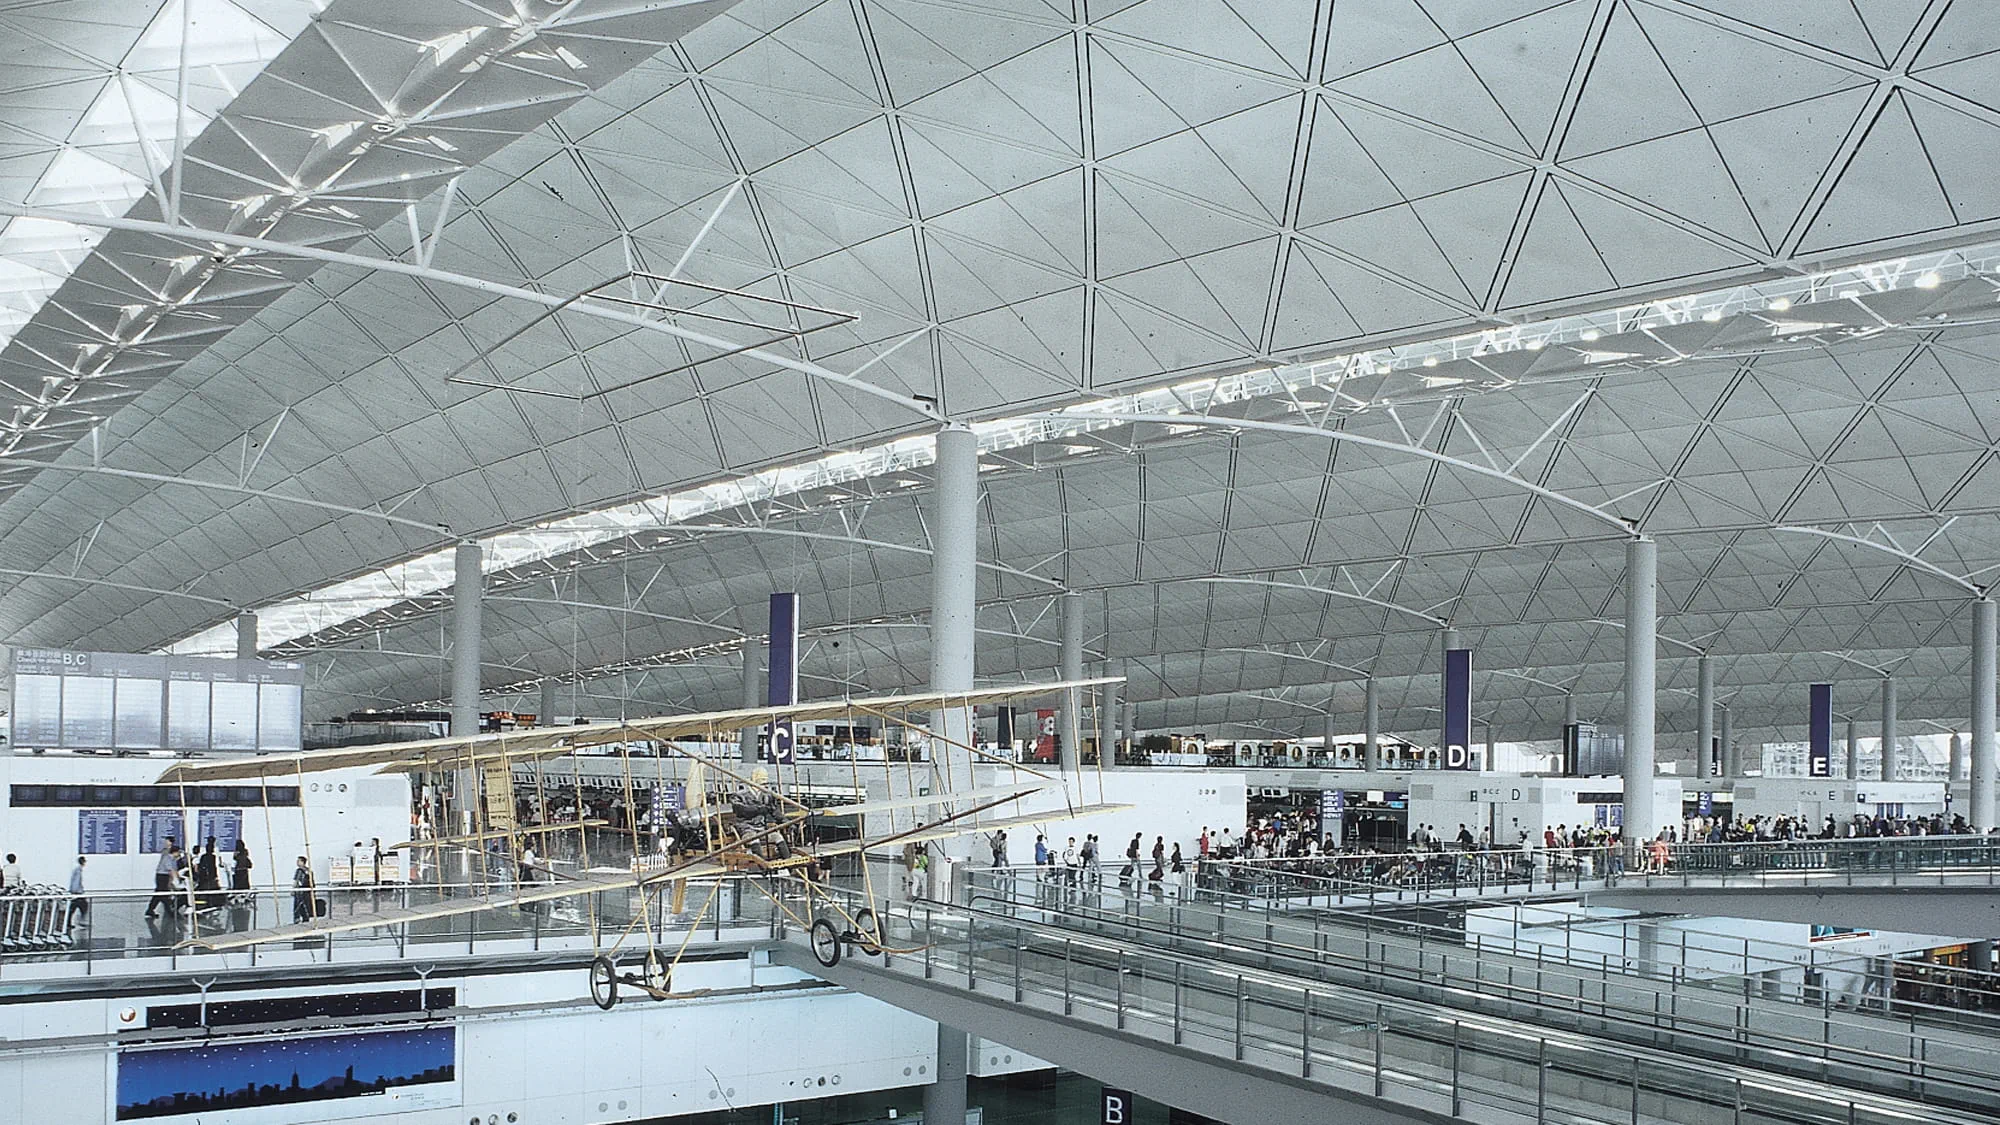 Interior view of the airport. Credit: Arup